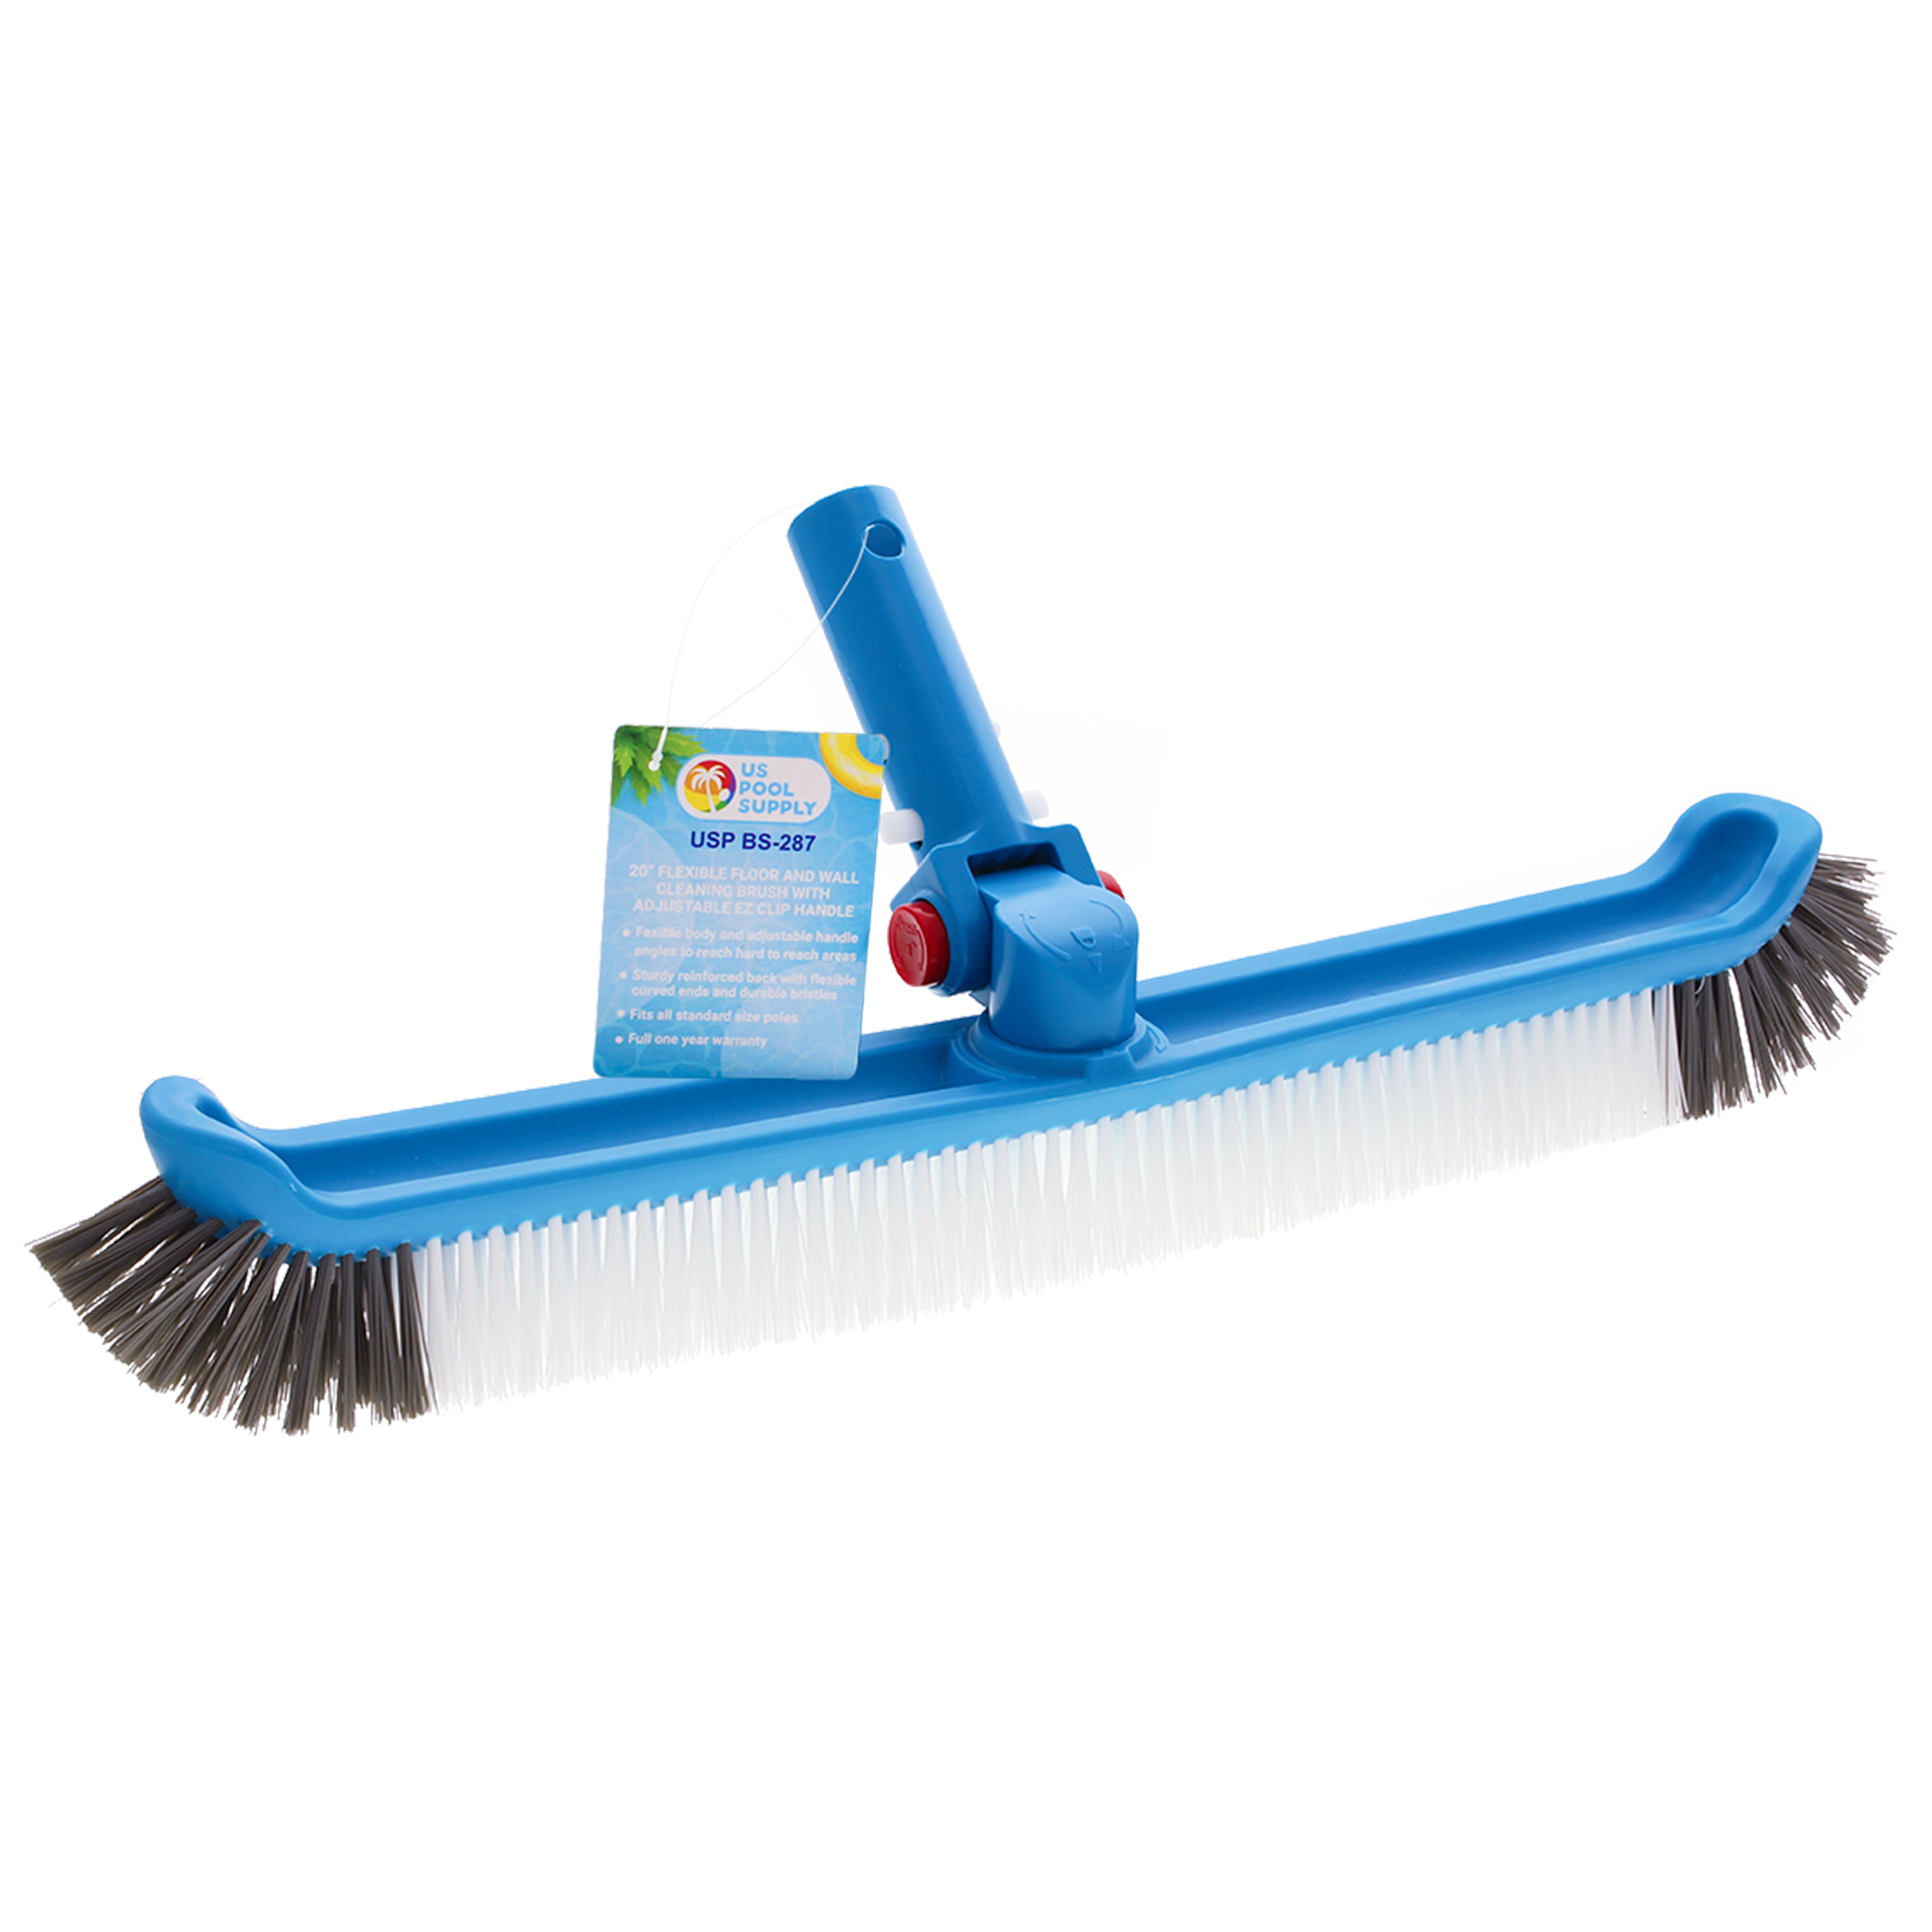 HAOFANG 18inch Nylon Pool Brushes Floor Pool Brush with Nylon Bristles and EZ Clip Handle Reinforced Curved Ends，with a Sturdy Aluminum Reinforced Aluminum Backed Body。